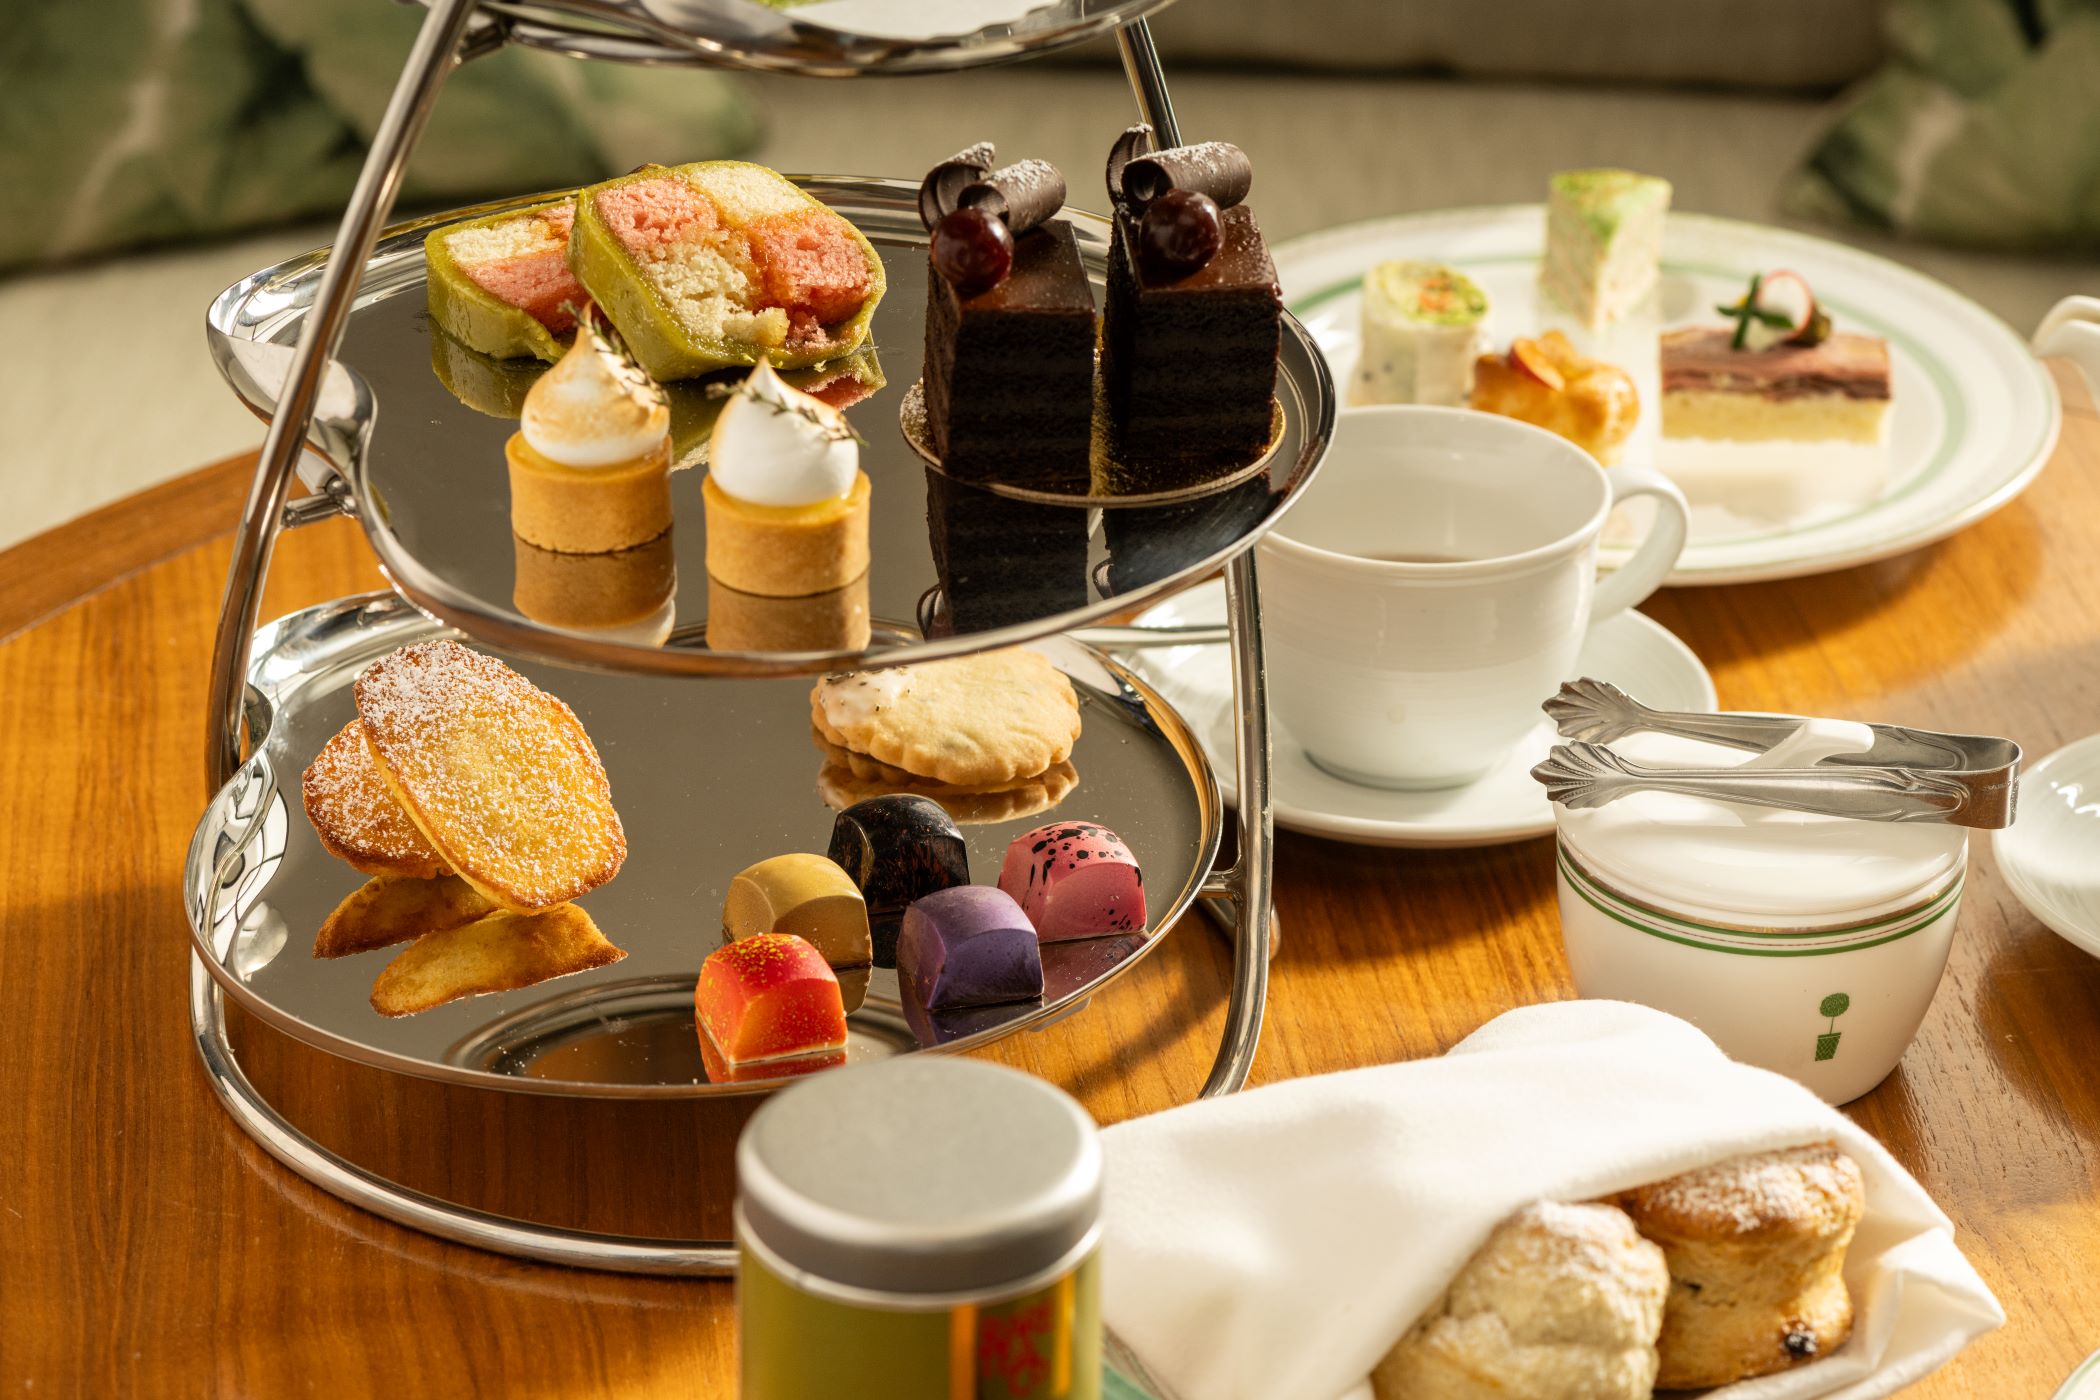 An image of the London's afternoon tea  spread, with tea, luxury chocolate, baked goods, and tea sandwiches. 